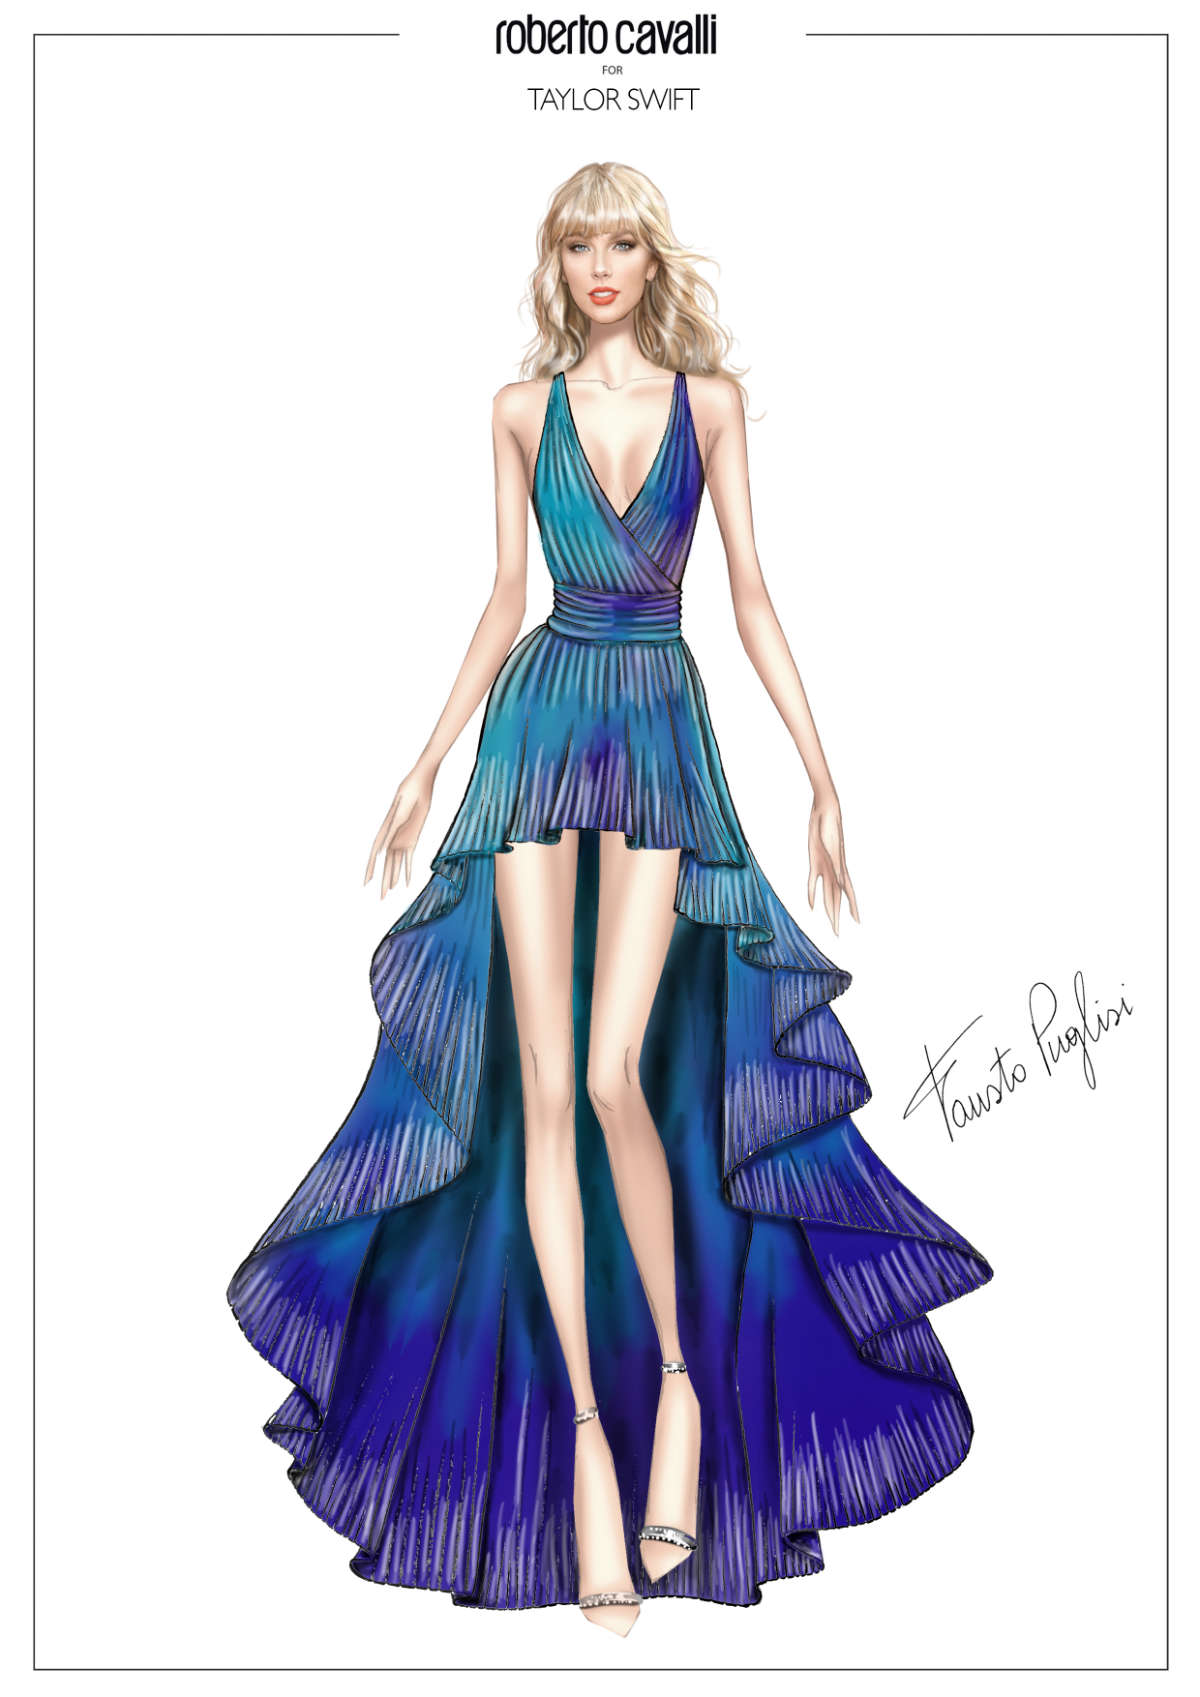 Taylor Swift In Custom Roberto Cavalli Couture During The Eras Tour